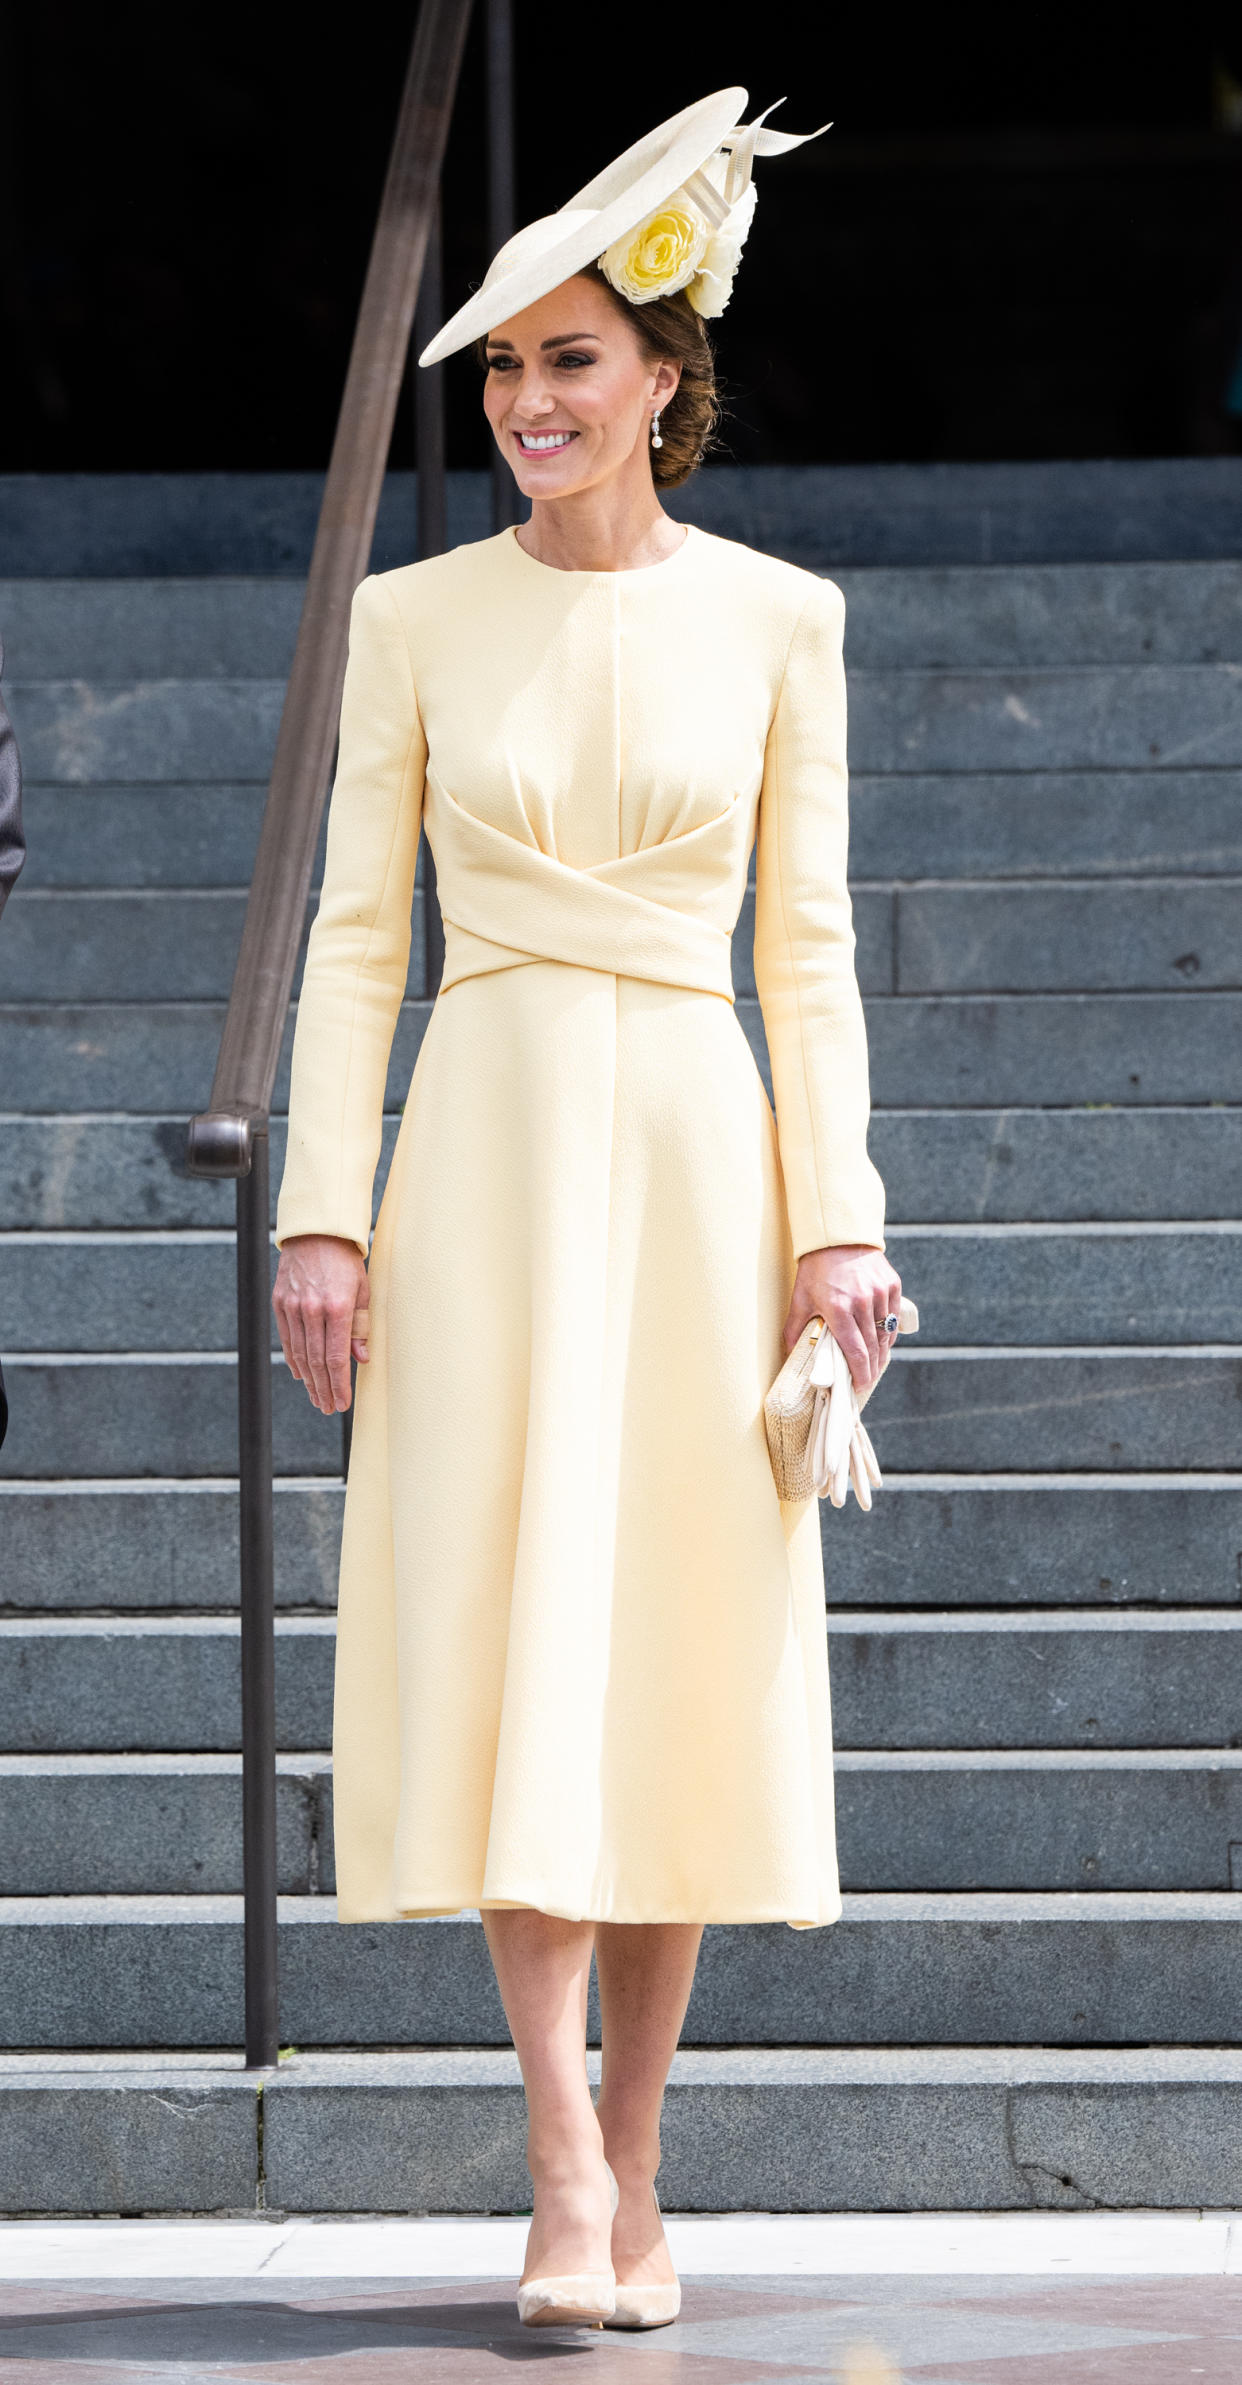 She stunned in lemon yellow Emilia Wickstead at the Thanksgiving service on Friday. (Getty Images)